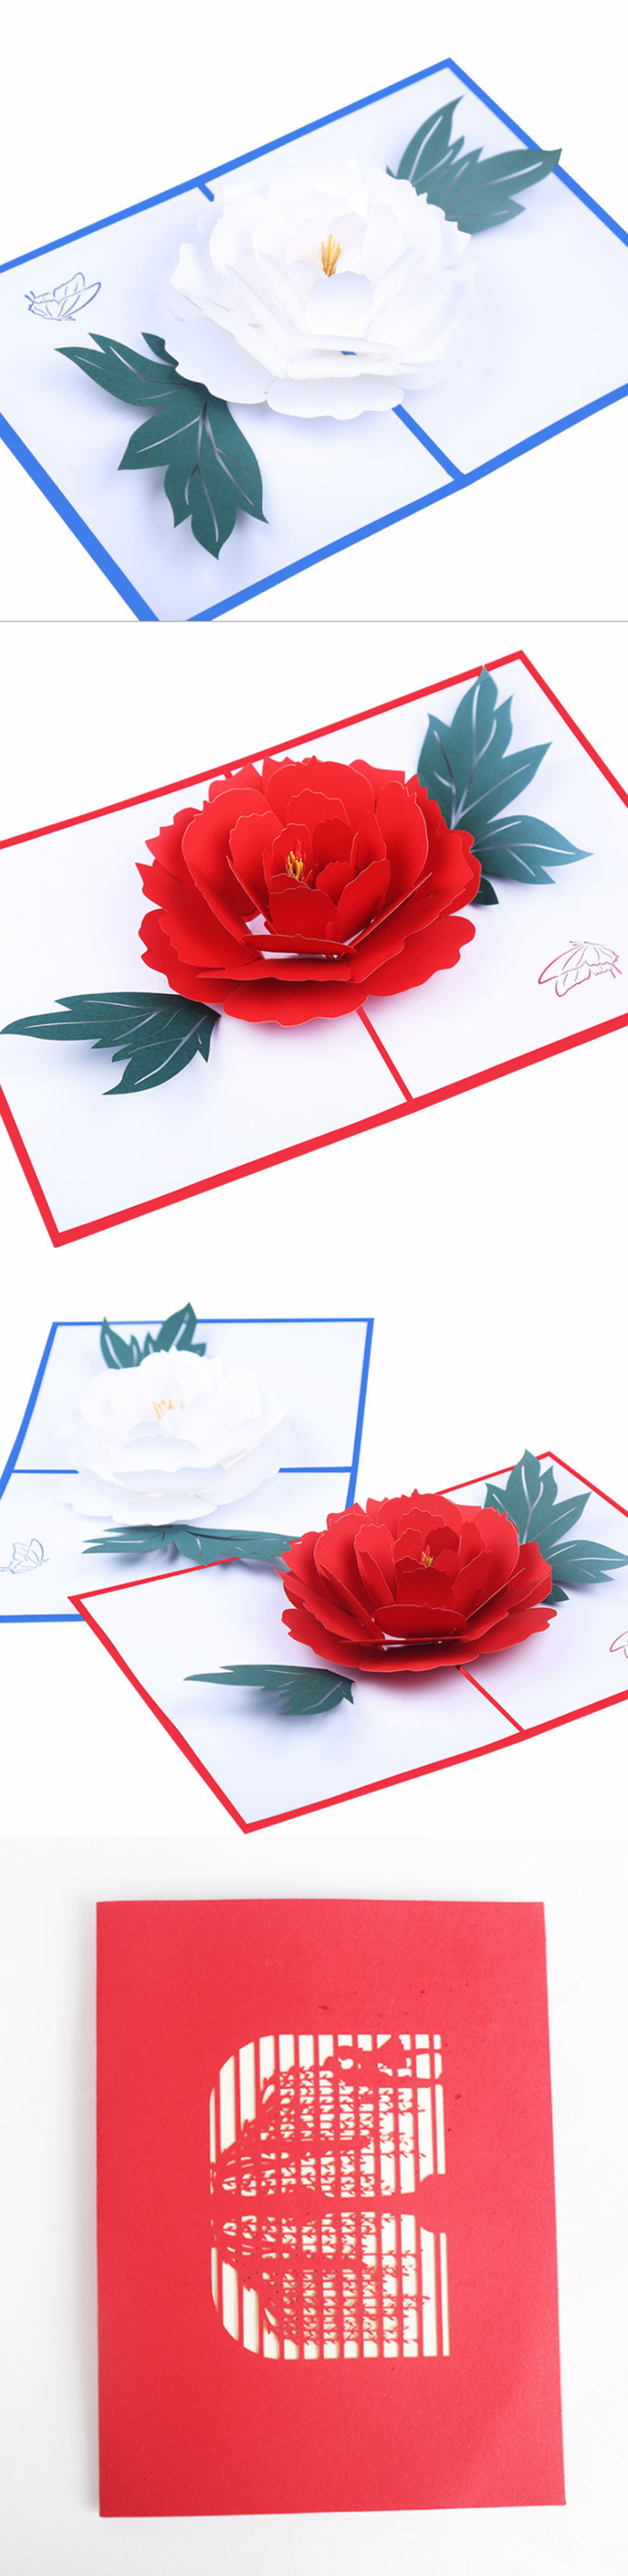 Rose popup cards